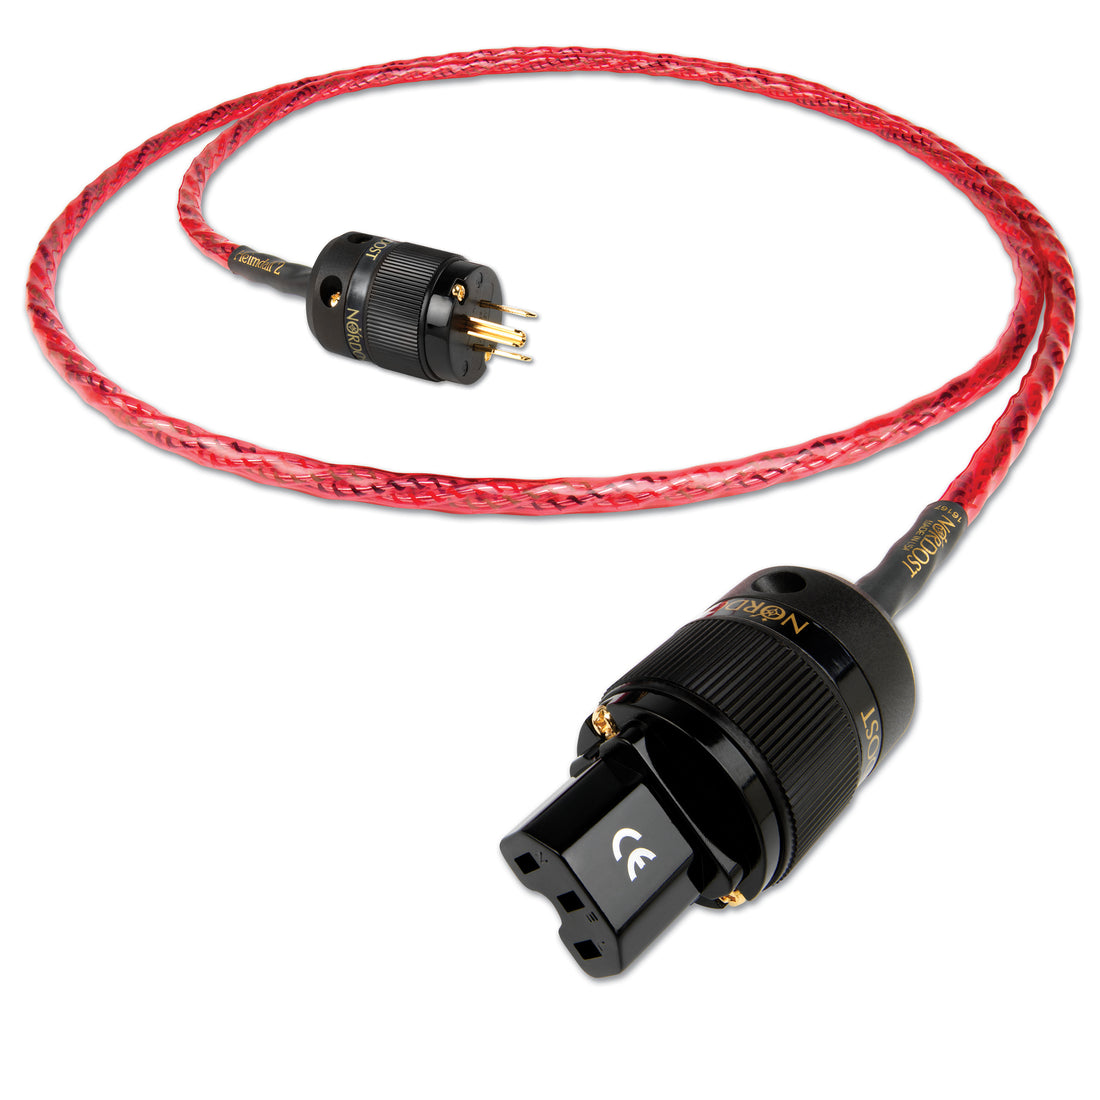 Heimdall 2 Power Cable